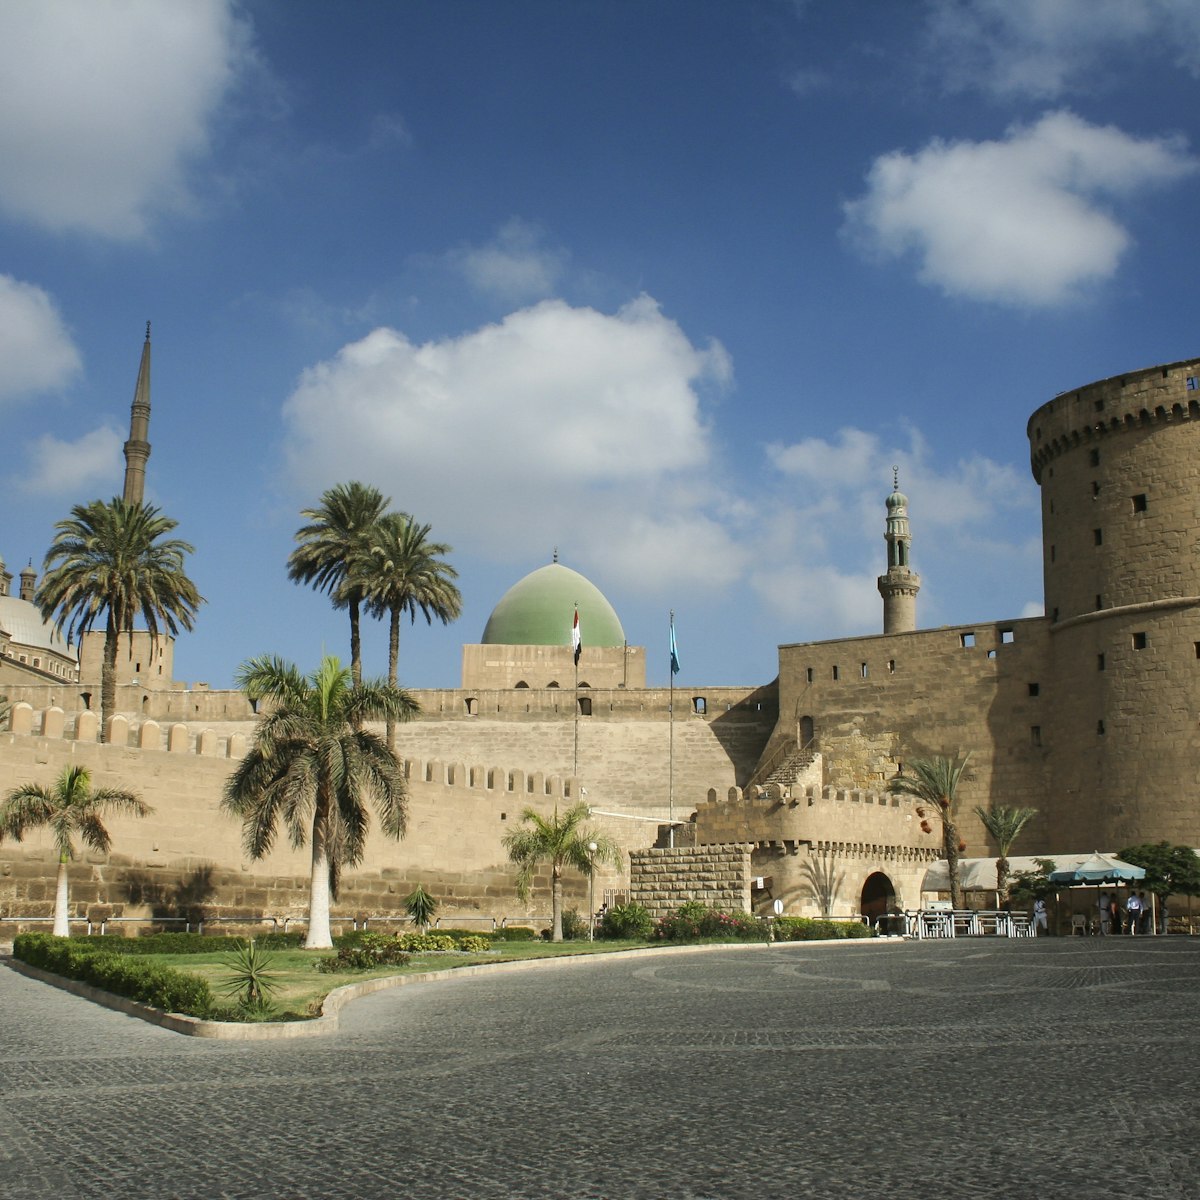 The Cairo Citadel with the Muhammad Ali Mosque